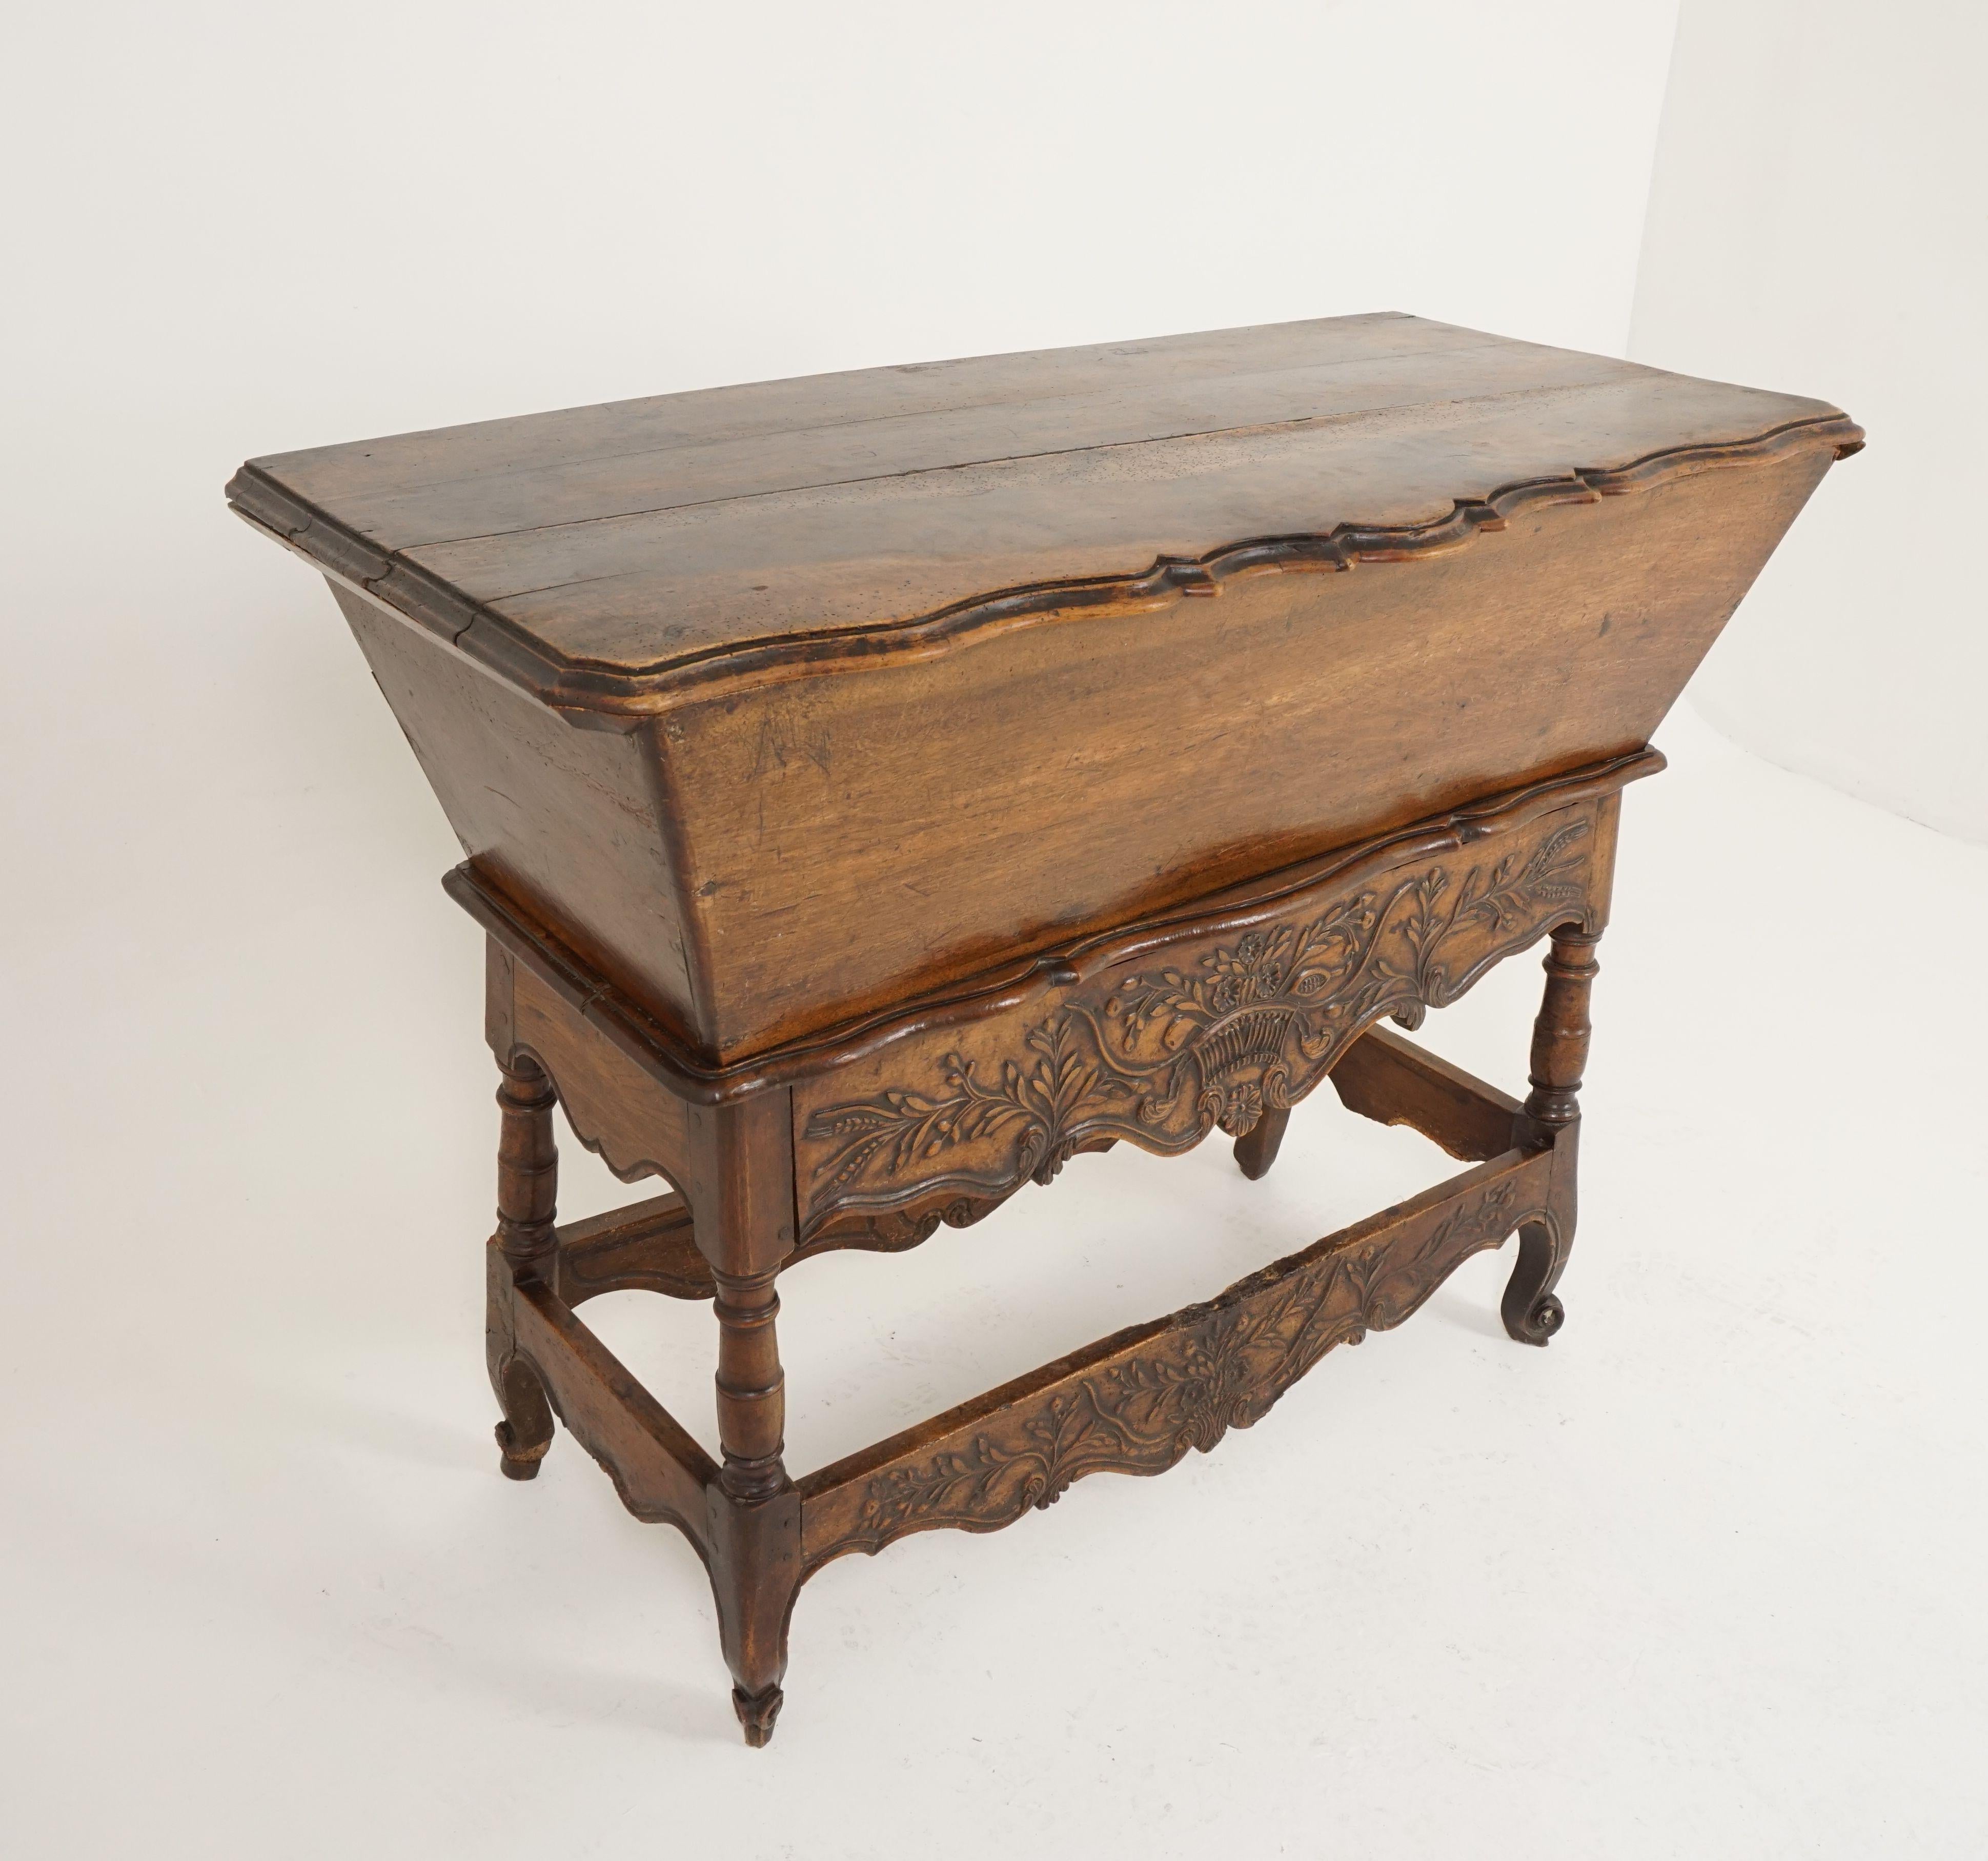 Antique French Louis XV carved walnut dough box, France, 1880, H196

France, 1880
Solid walnut
Original finish
Three board scalloped lift up lid
Opens to reveal large storage compartment
Beautifully carved drawer with foliage design underneath
All